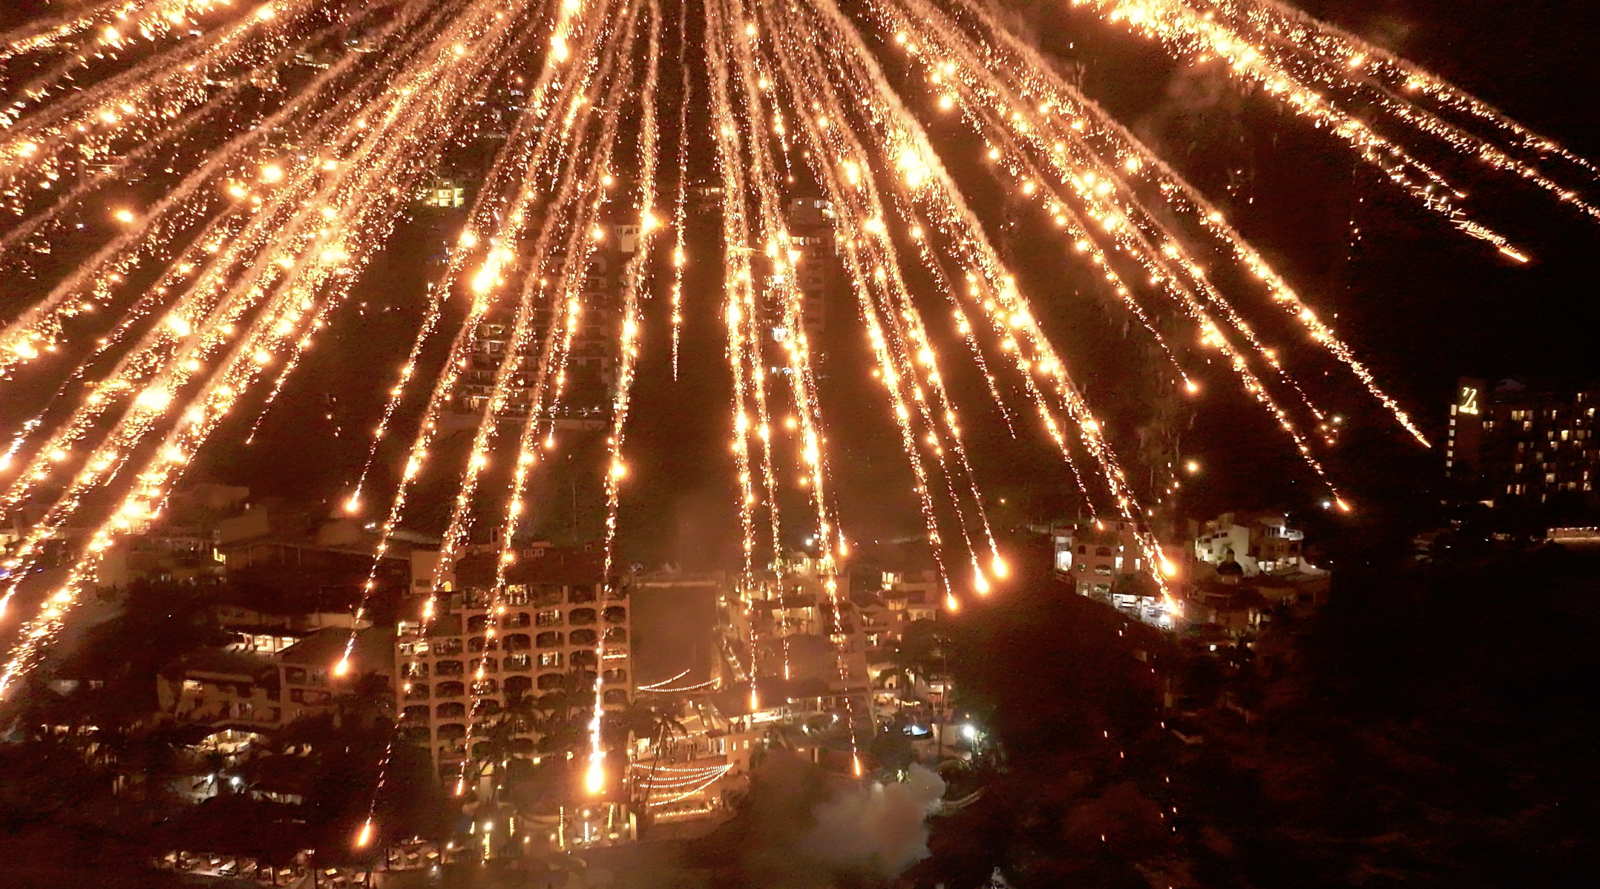 Aerial view of a nighttime fireworks display over a densely populated area, captured by a traveling wedding photographer.